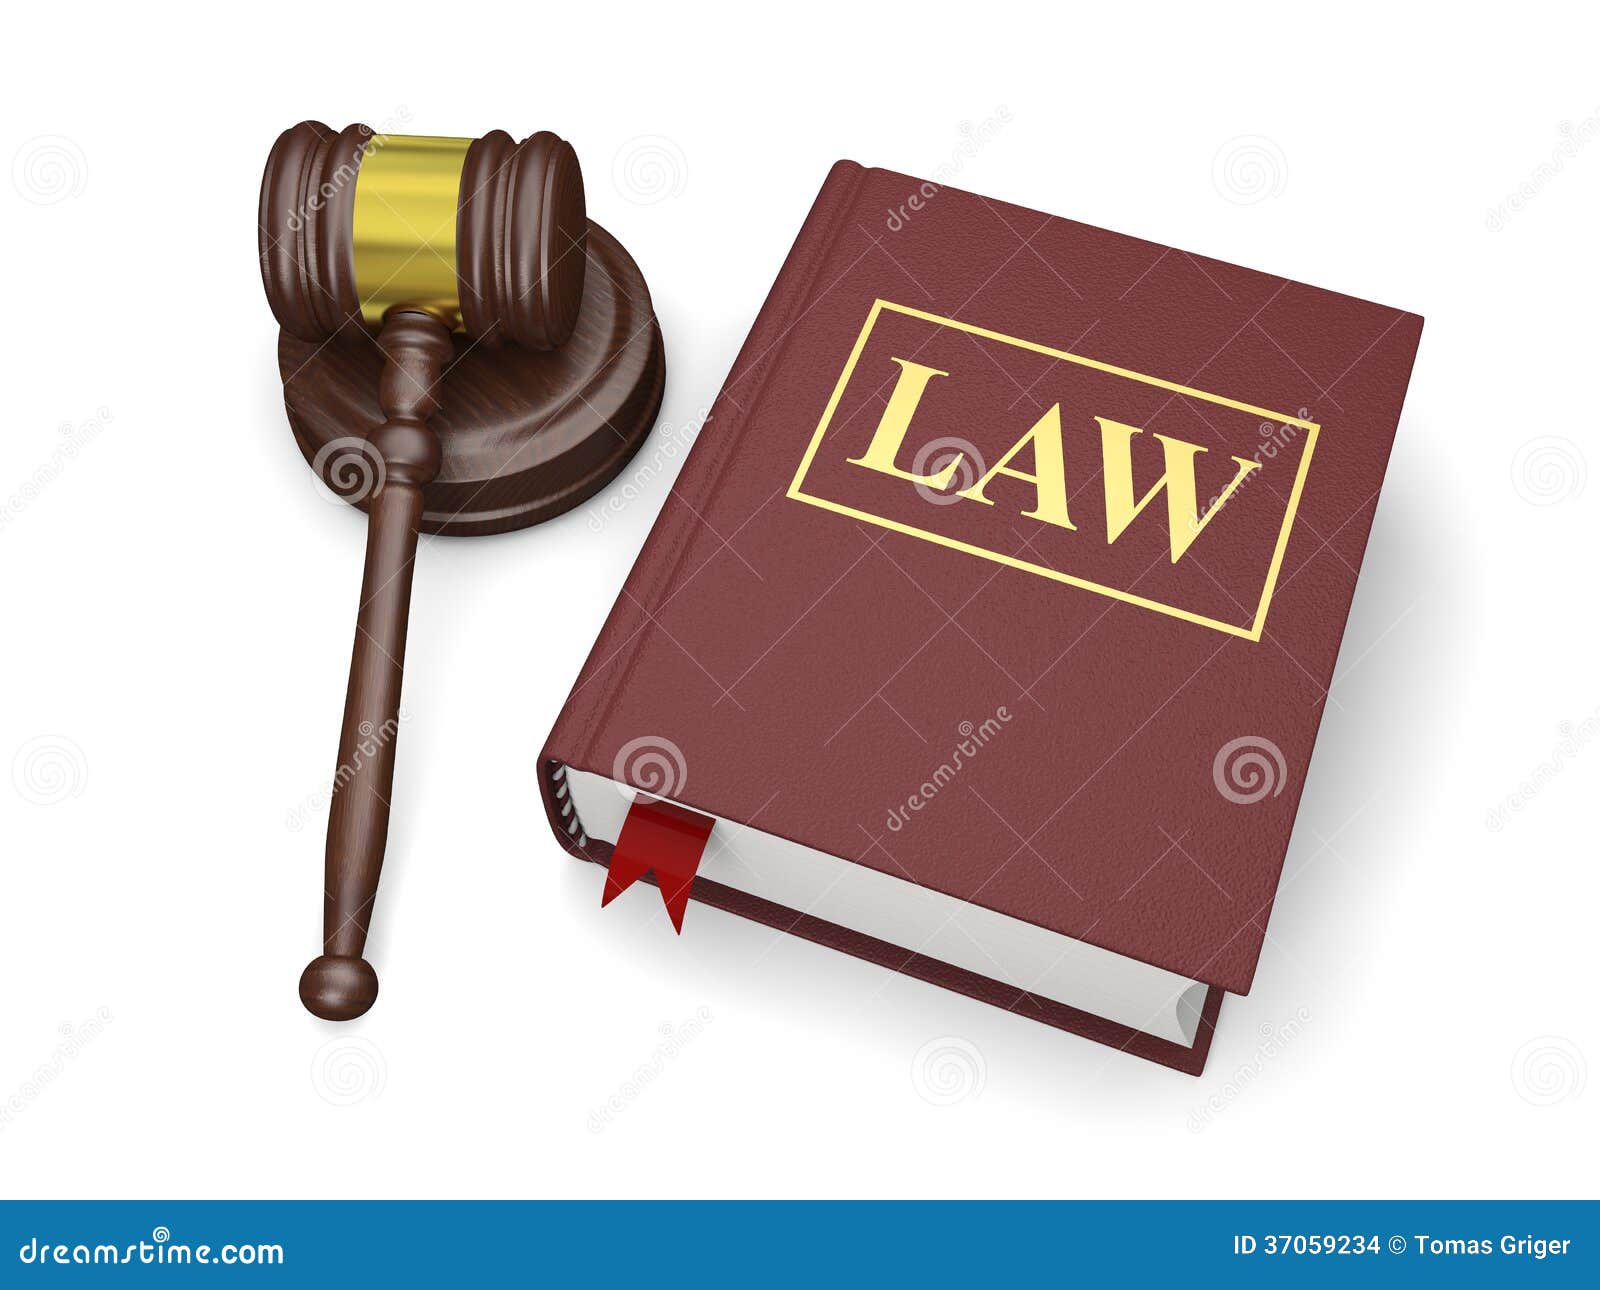 law book clipart - photo #18